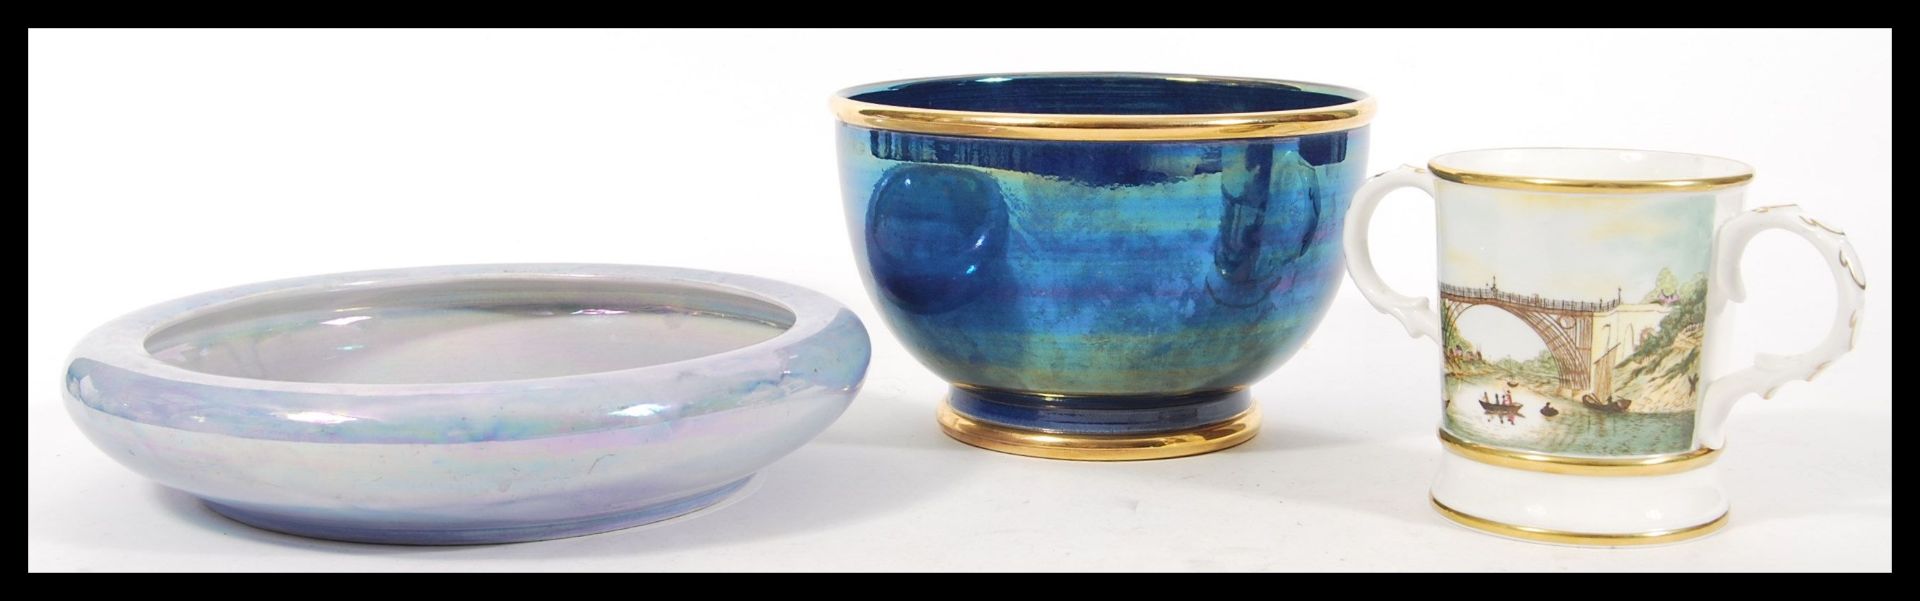 A 20th century Devon Lustre Fieldings centrepiece bowl with lilac colouration along with a dark blue